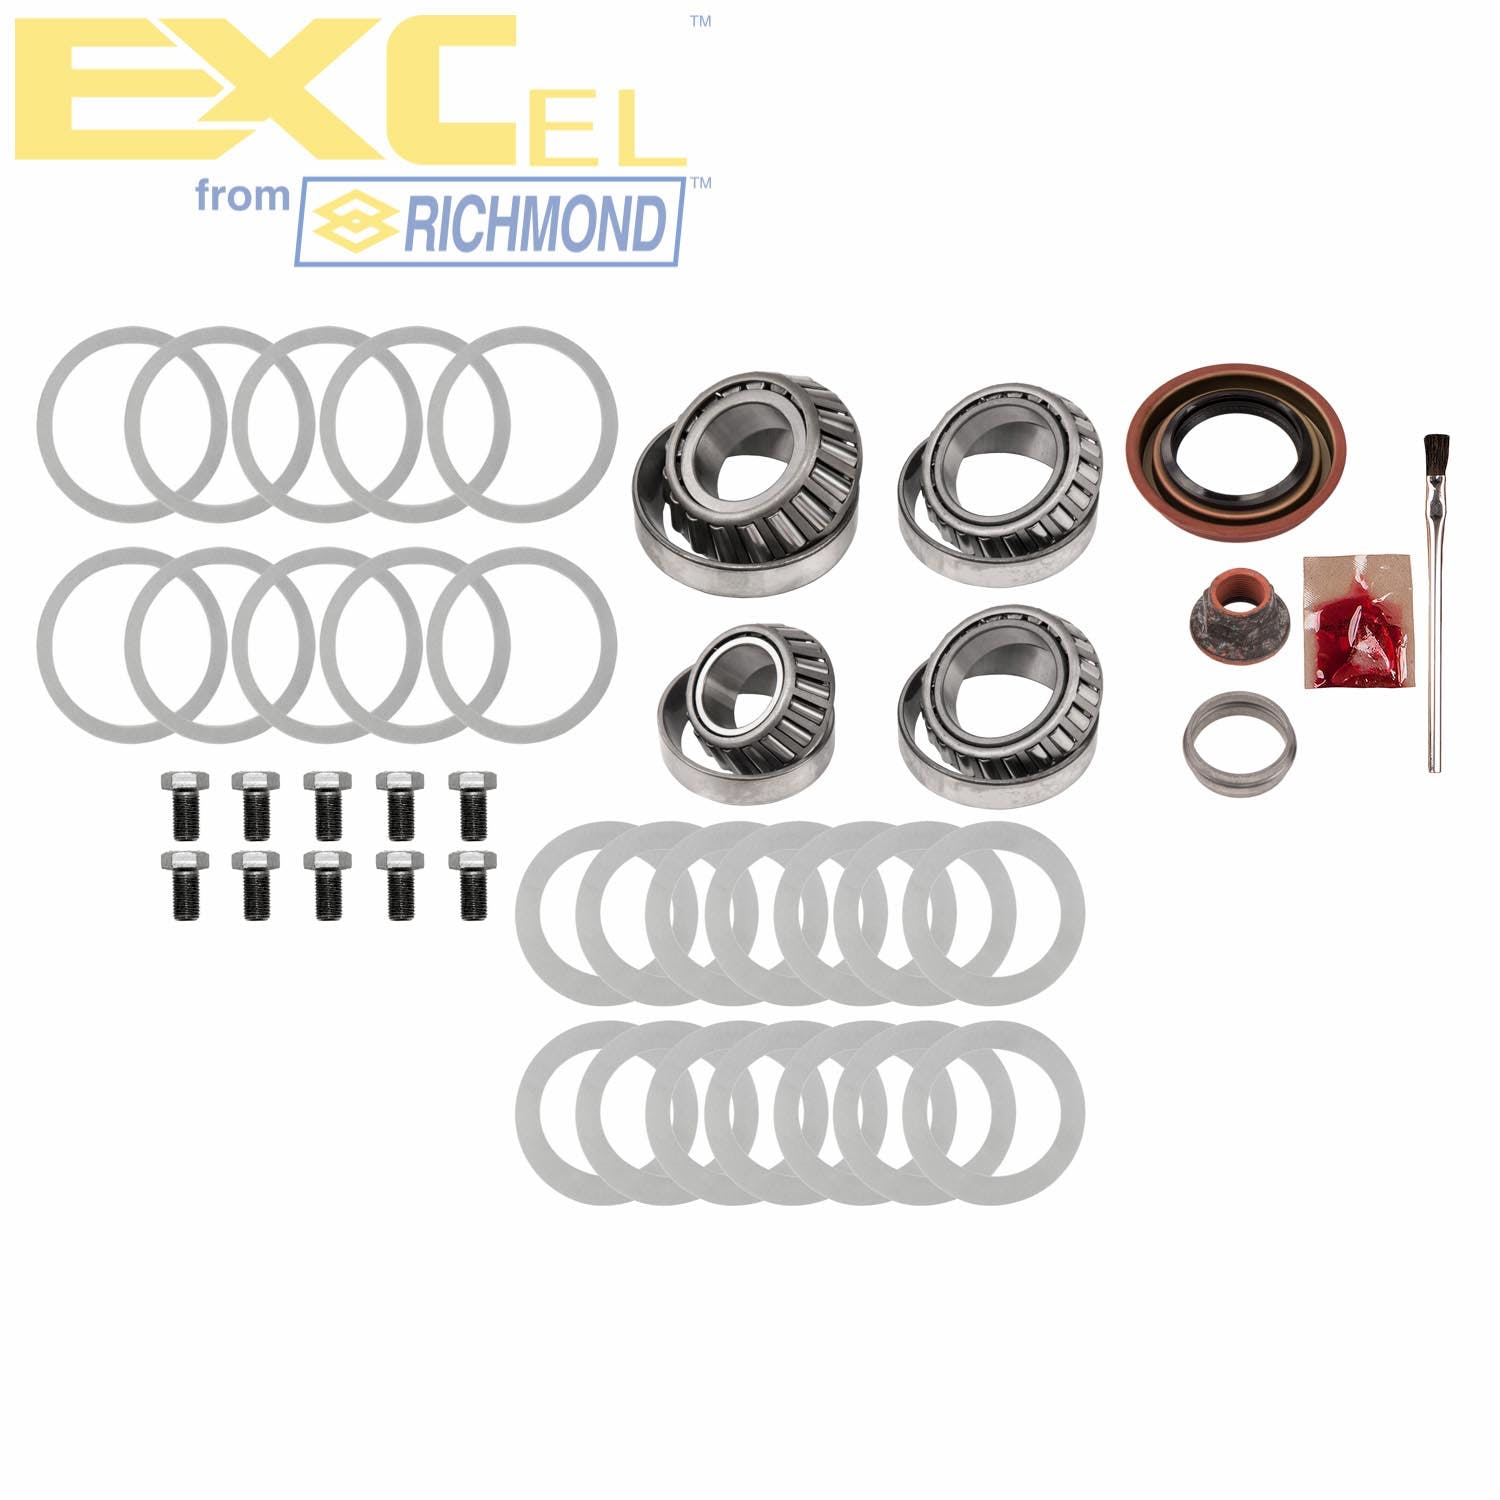 Excel XL-1082-1 Differential Bearing Kit